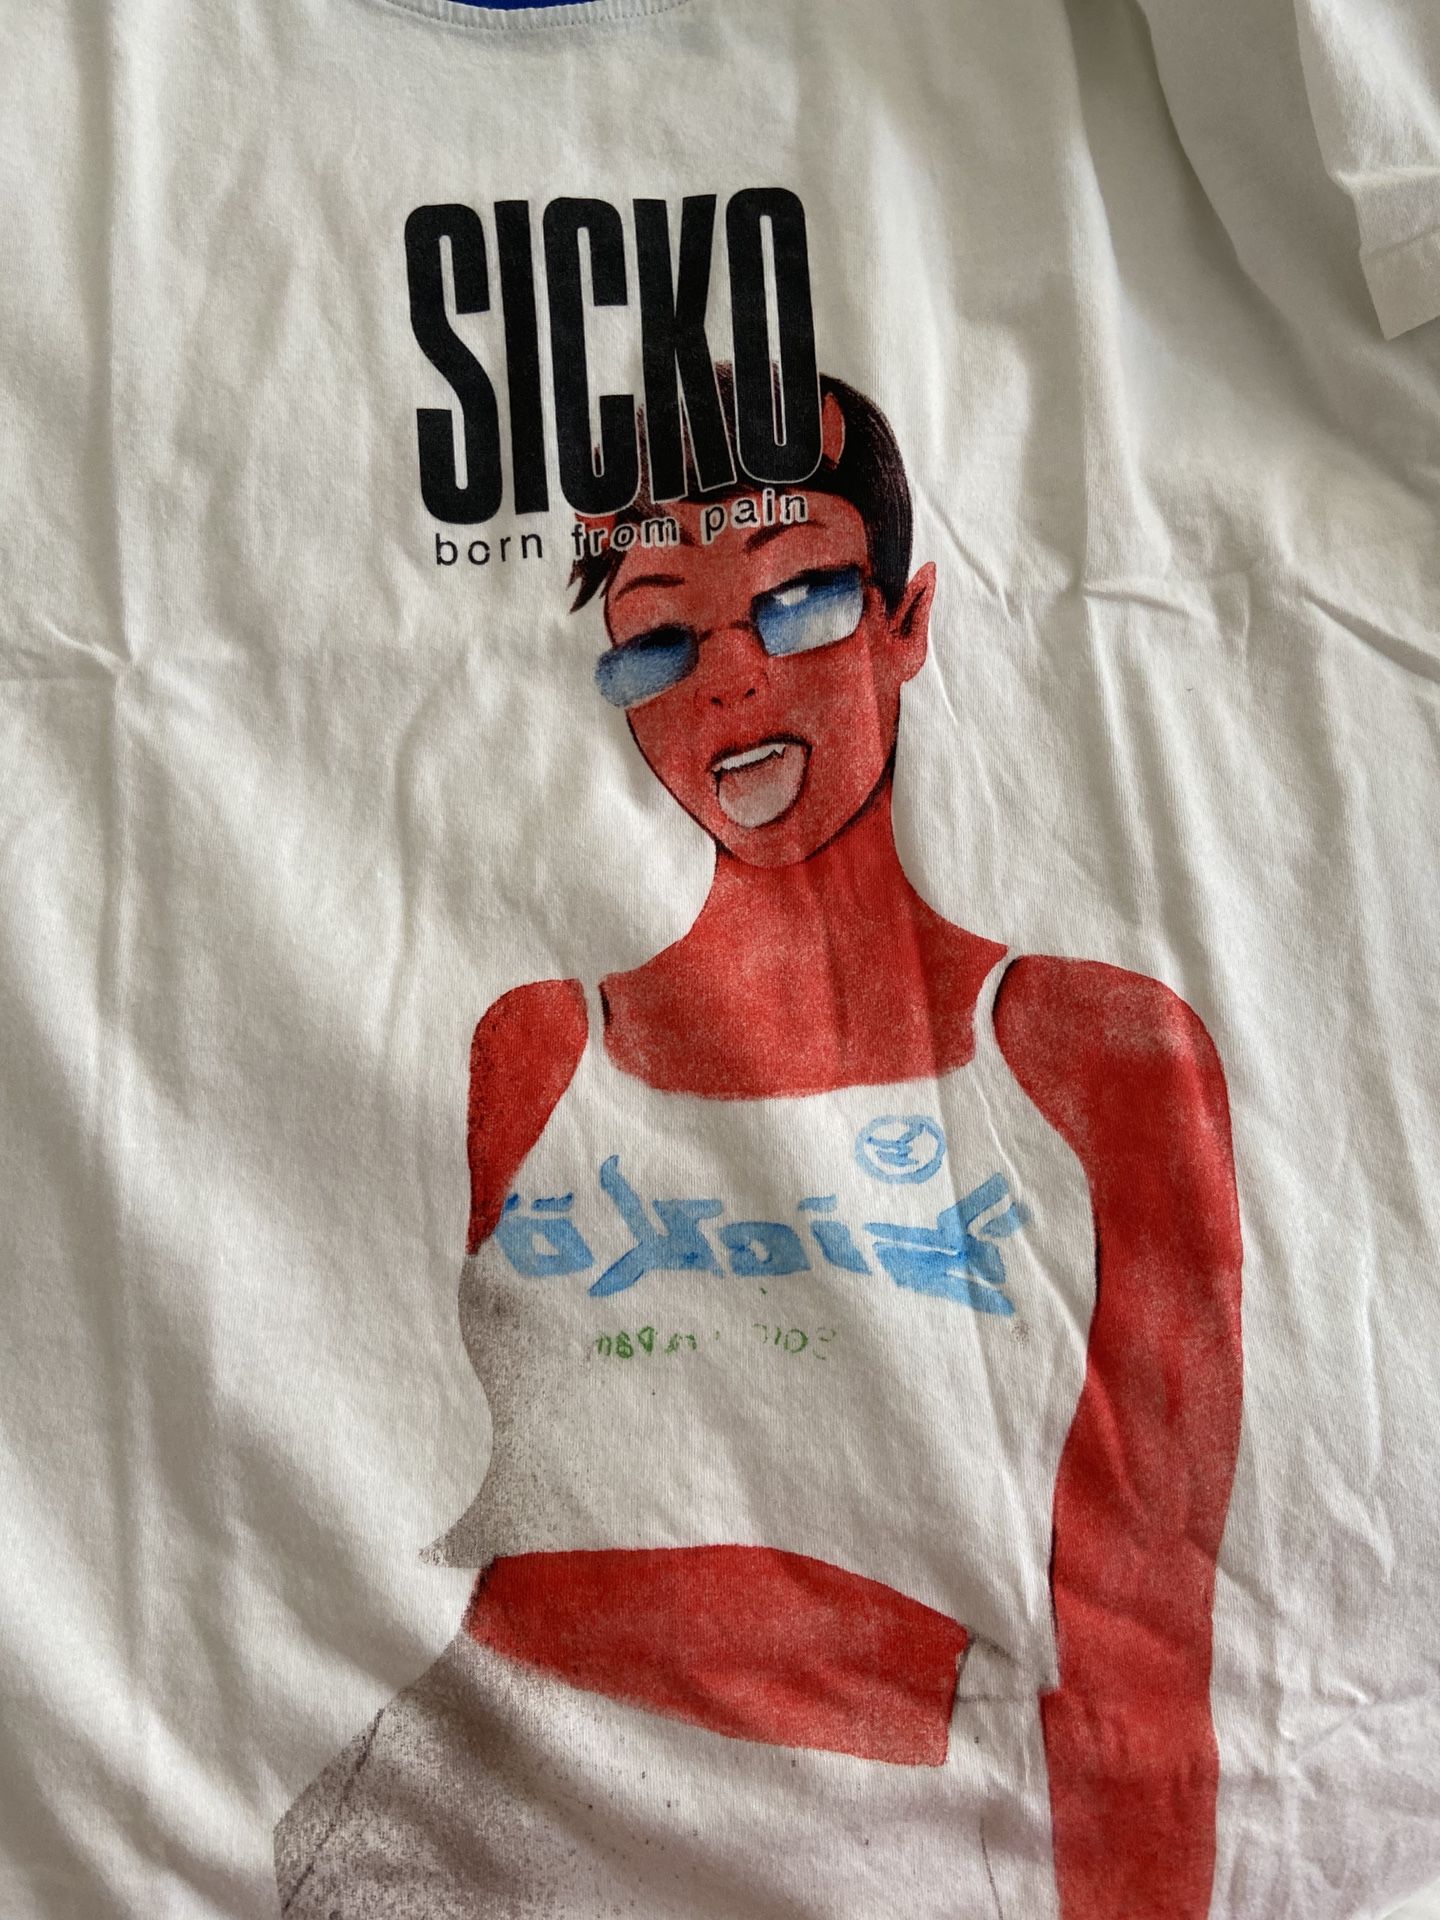 Sicko Born From Pain Ringer Tee Size XL